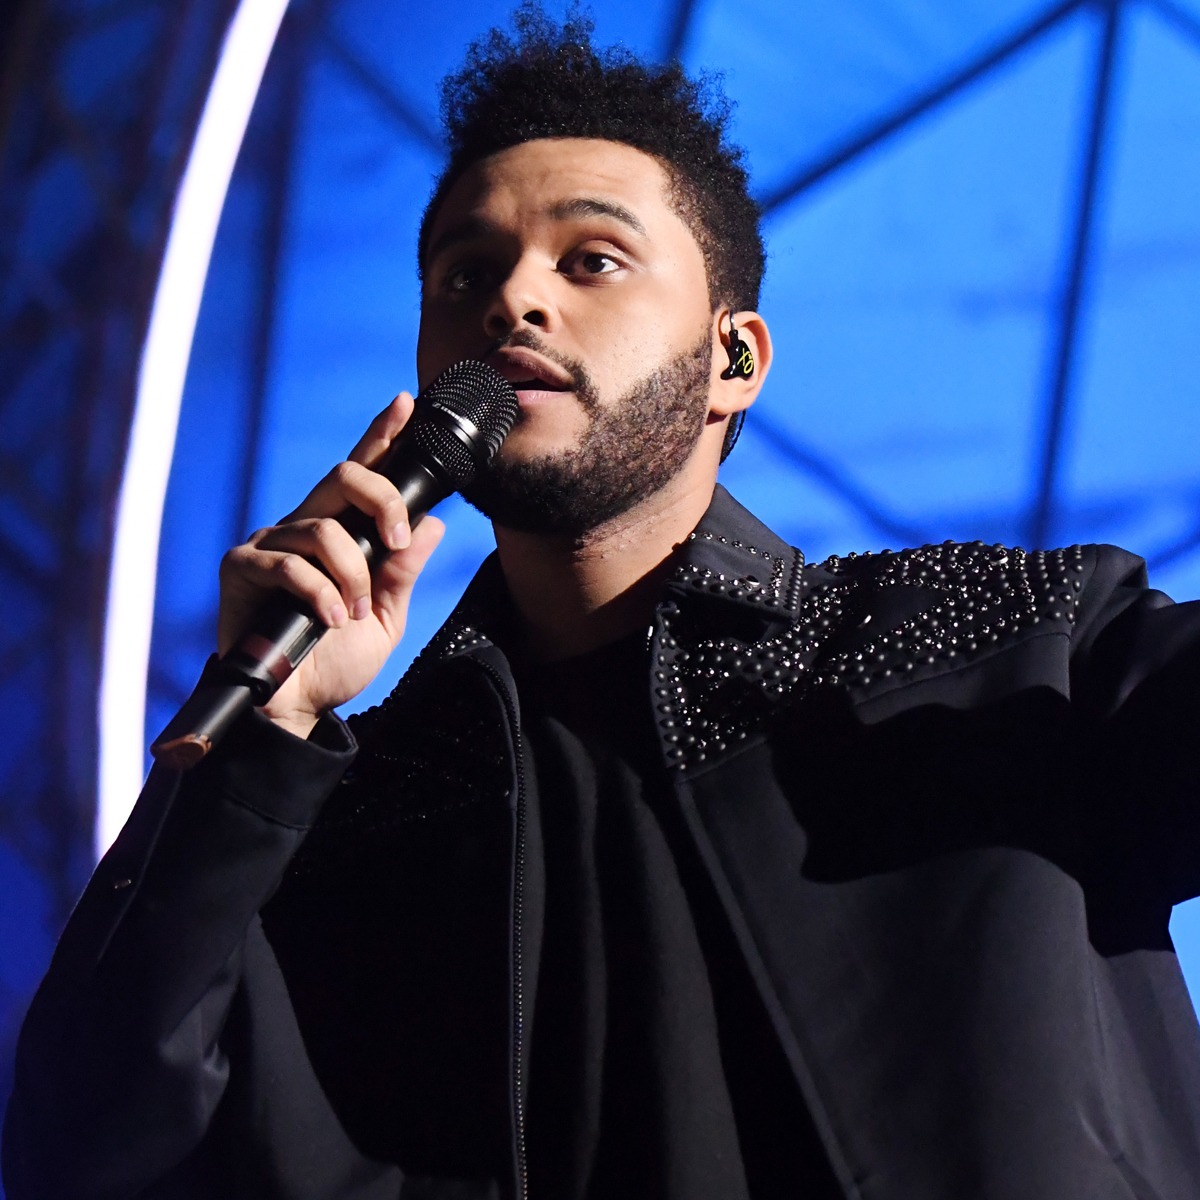 How Much Was The Weeknd Paid For The Super Bowl Halftime Show? - Capital